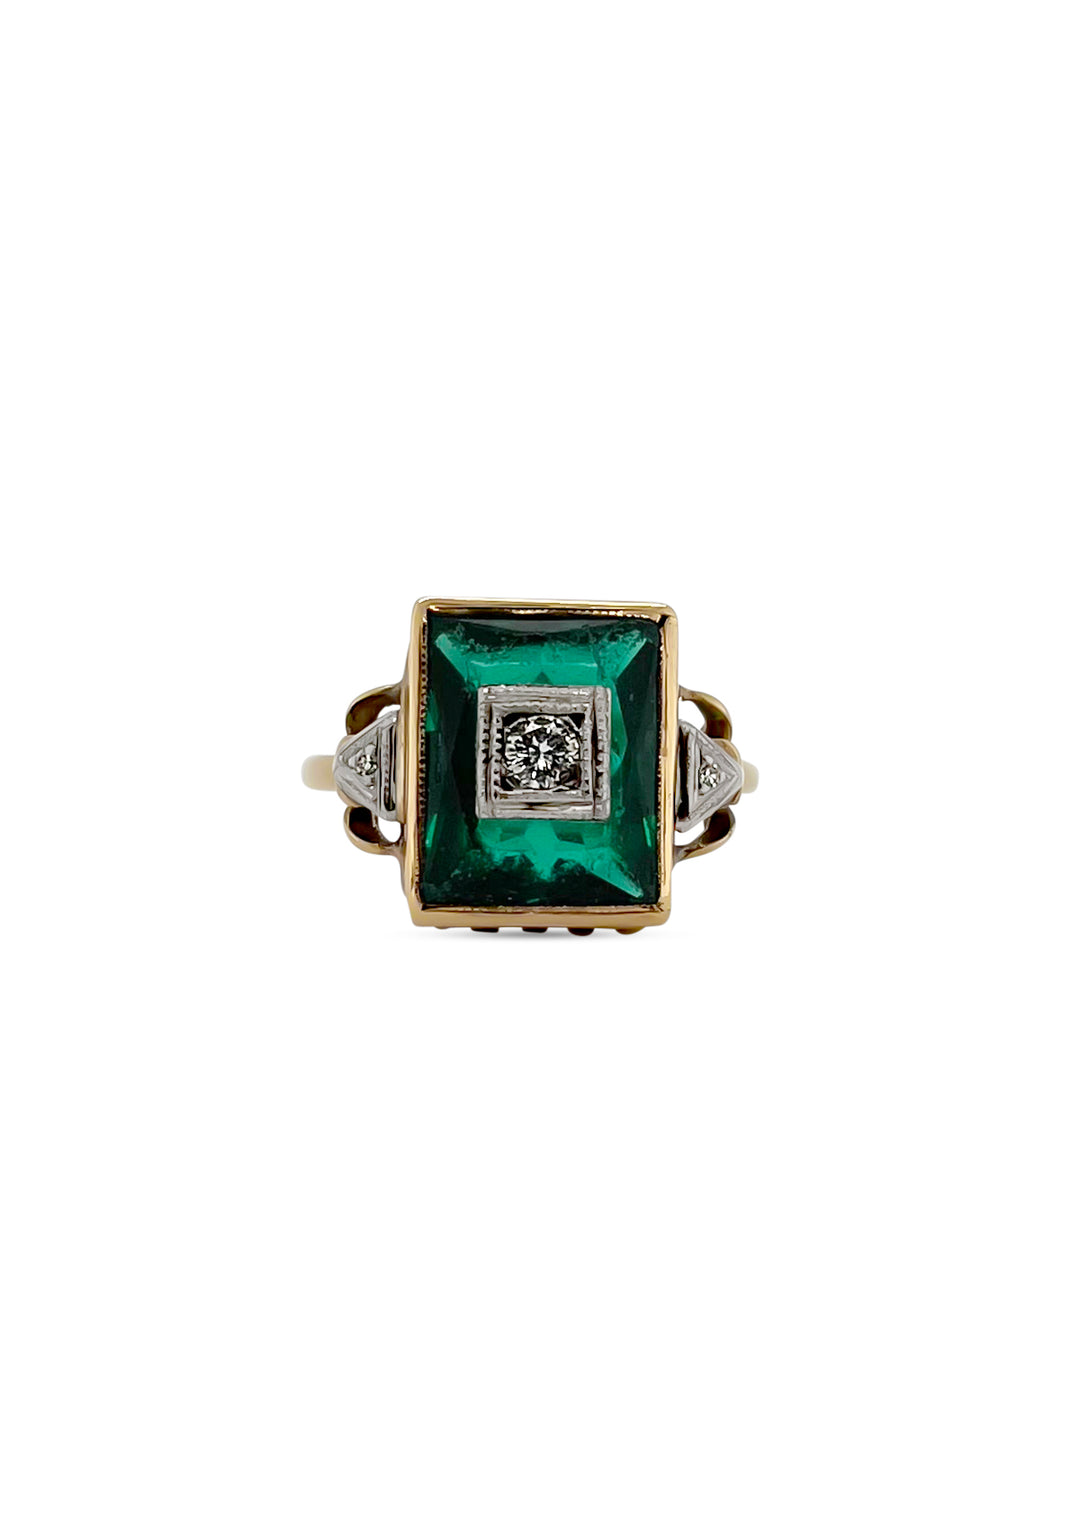 10K Yellow Gold Antique Synthetic Spinel Ring